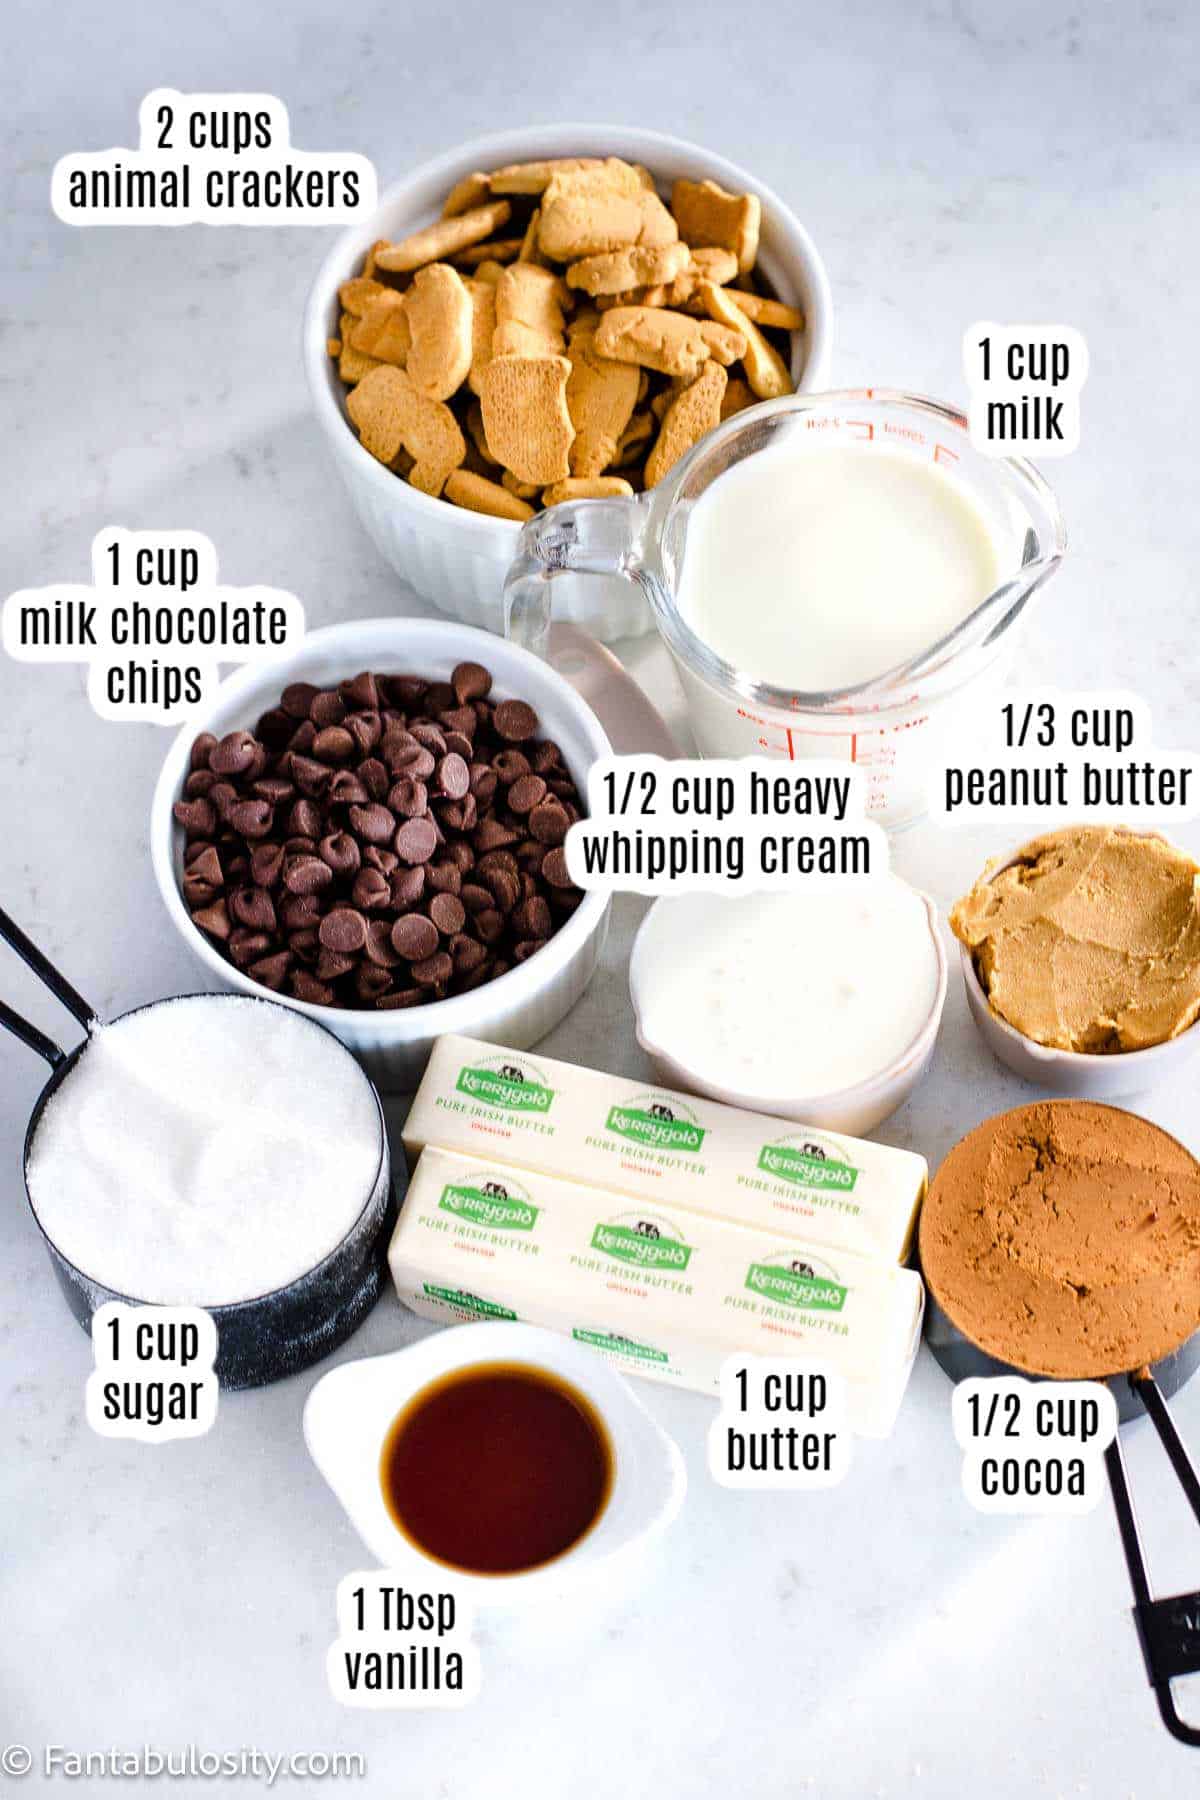 Labeled ingredients for lazy cake.